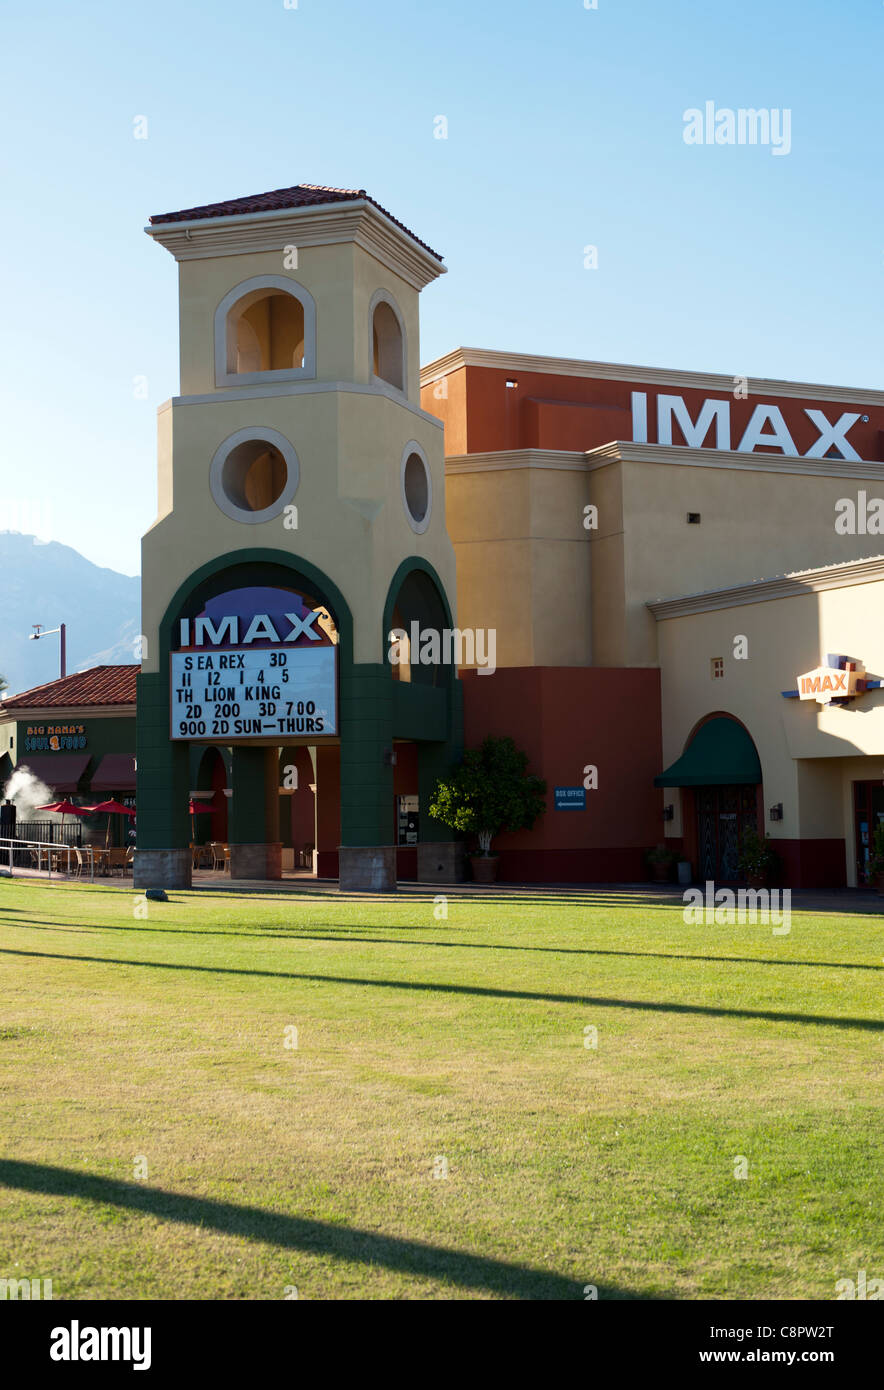 Imax Movie Theater Stock Photos Imax Movie Theater Stock Images